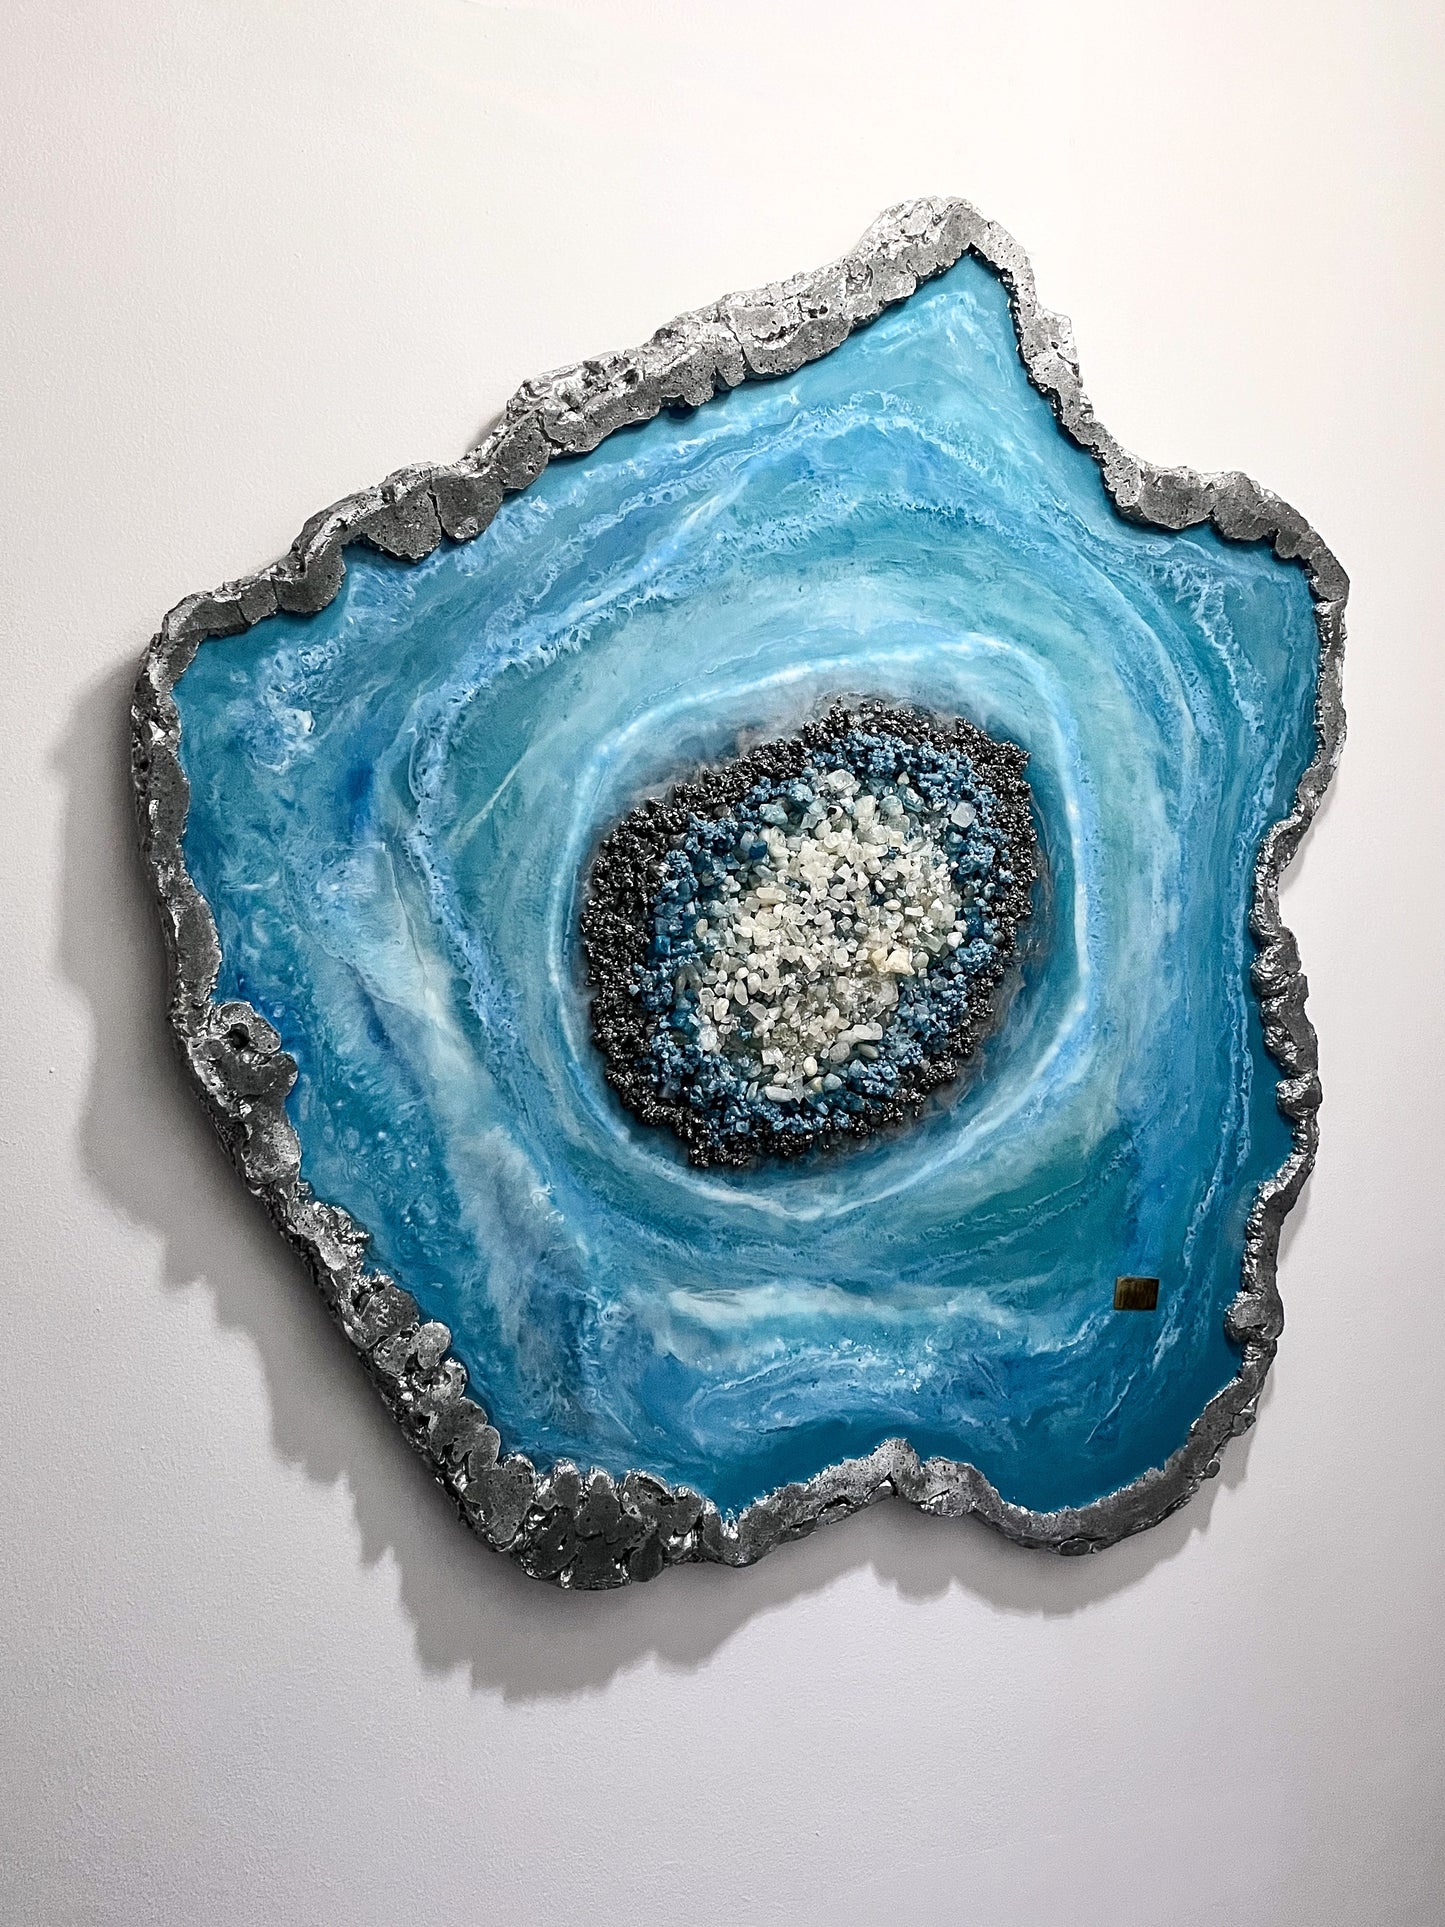 Turqoise agate painting